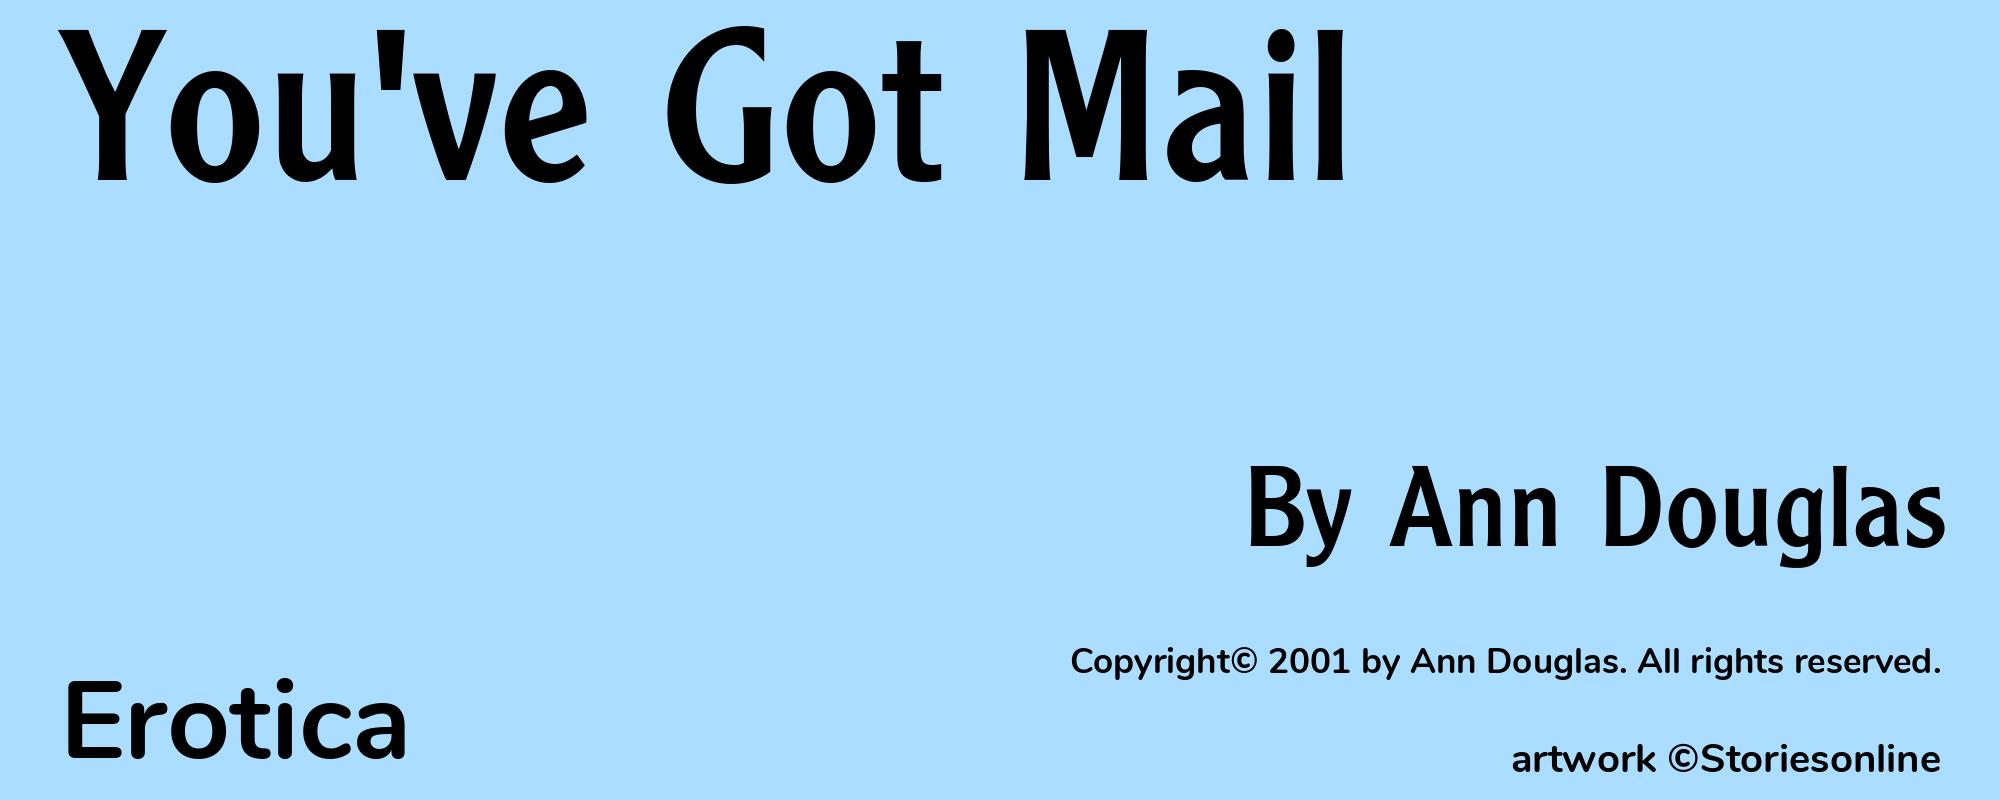 You've Got Mail - Cover